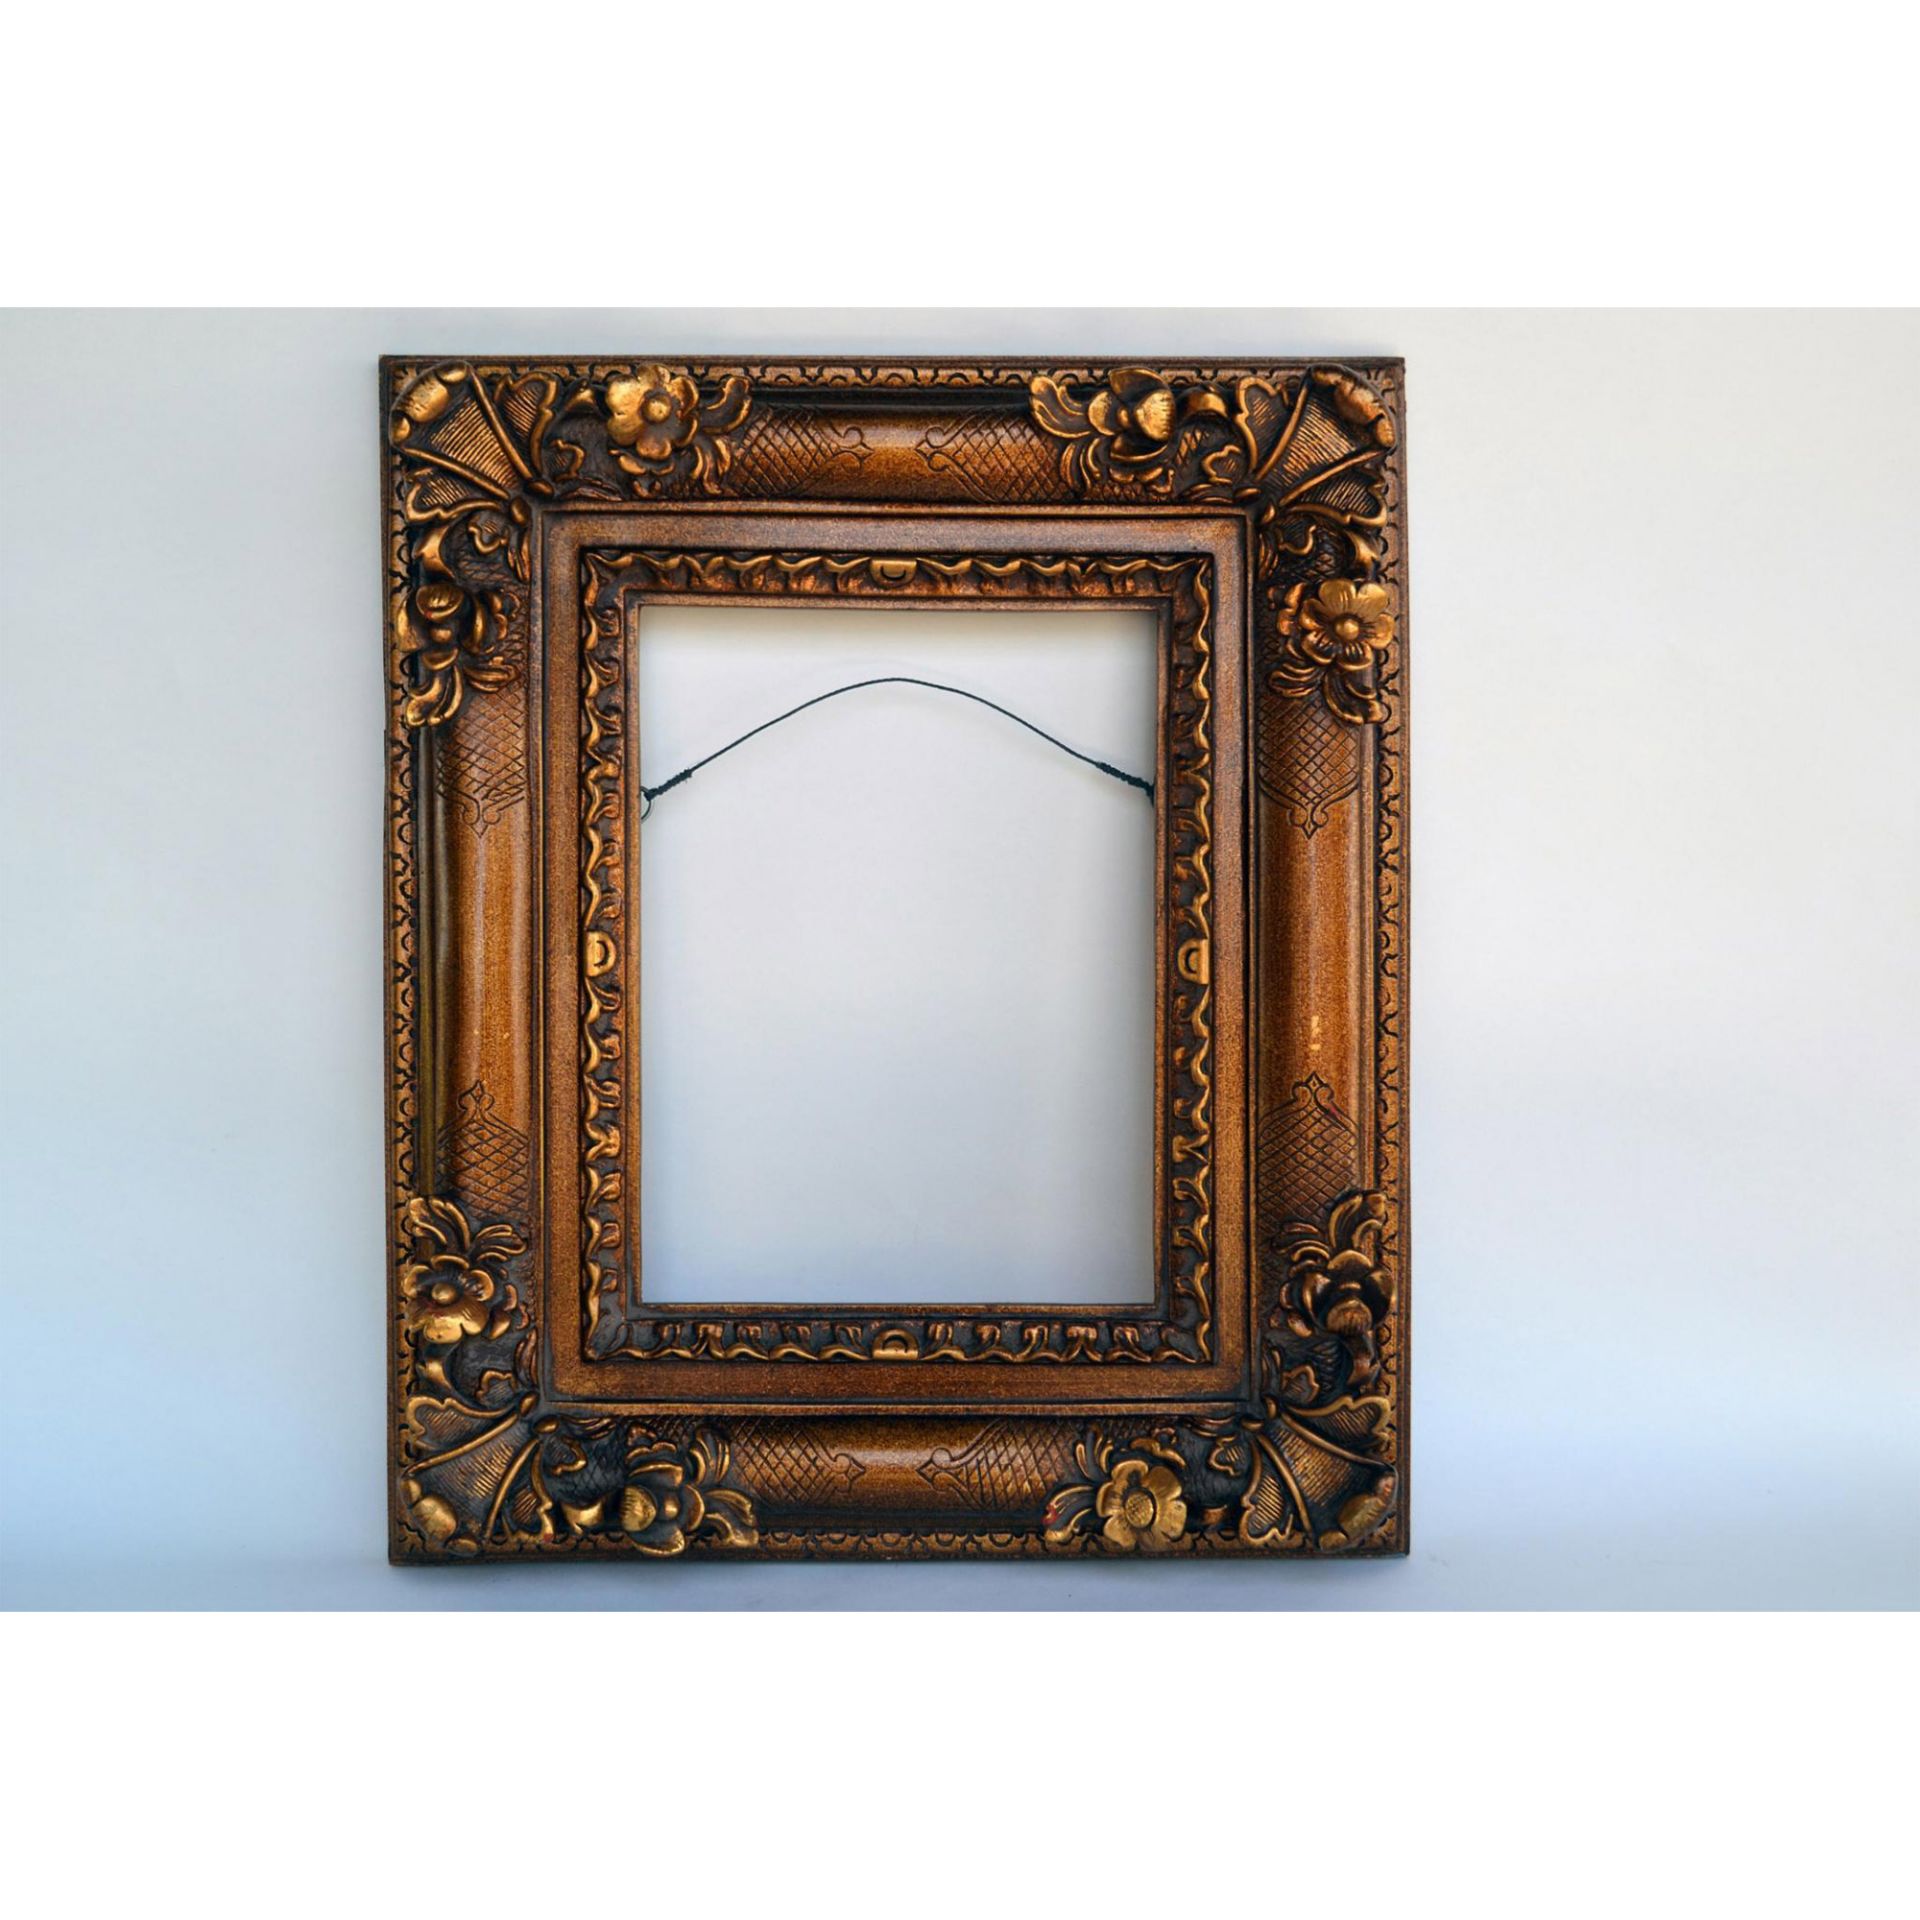 Gold Ornate Classic Frame, 27"H - Image 3 of 3